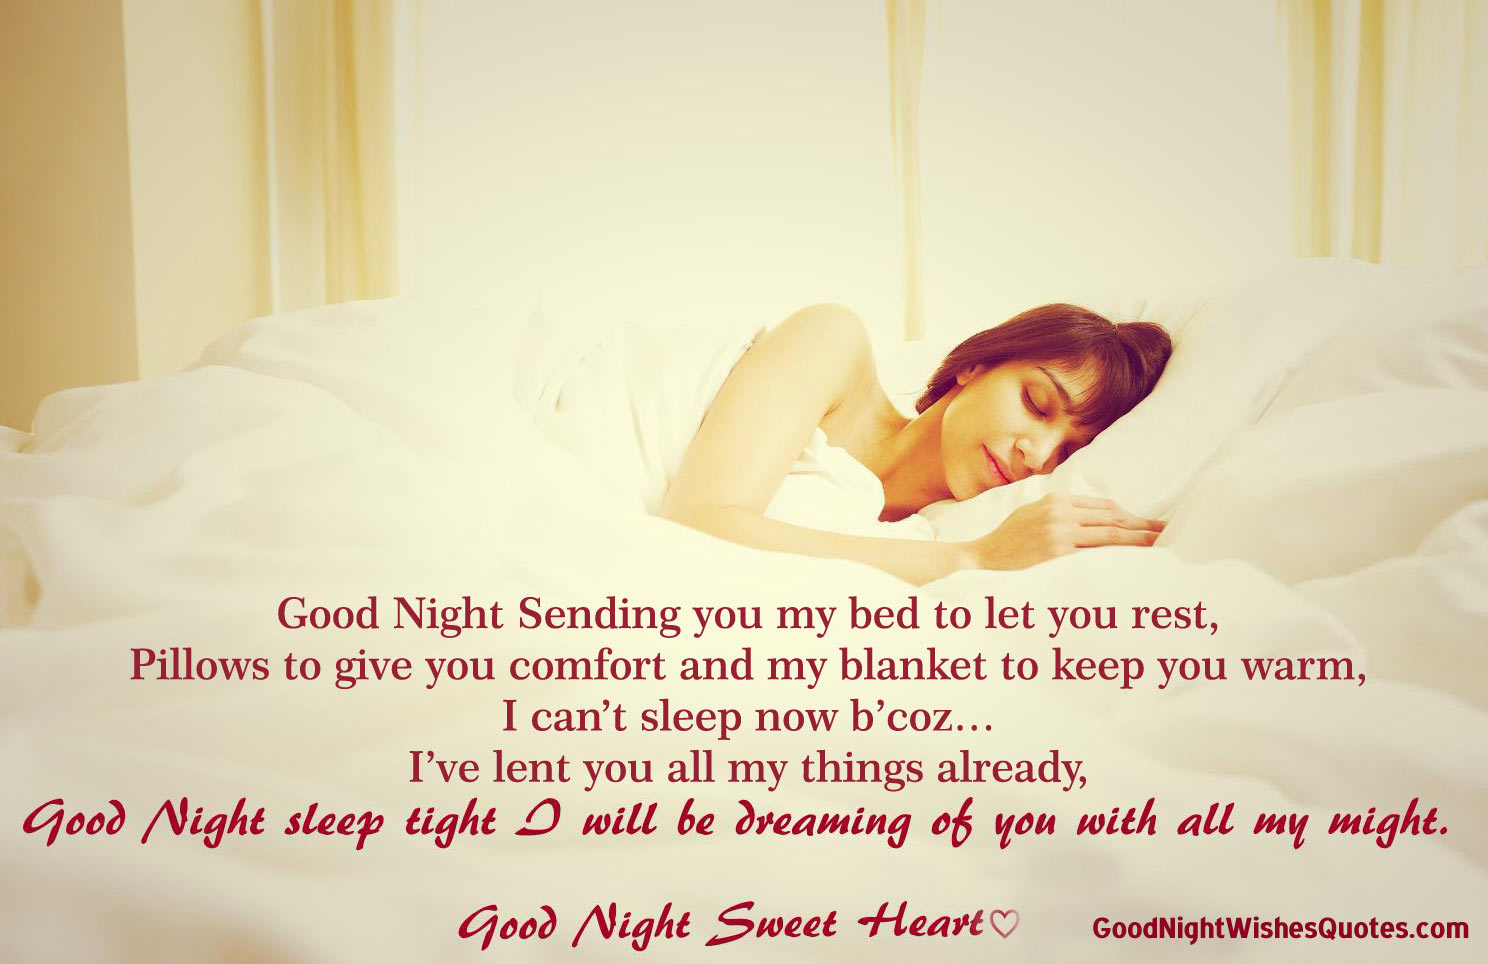 Special Goodnight Sweetheart Quotes, Messages Greetings Images